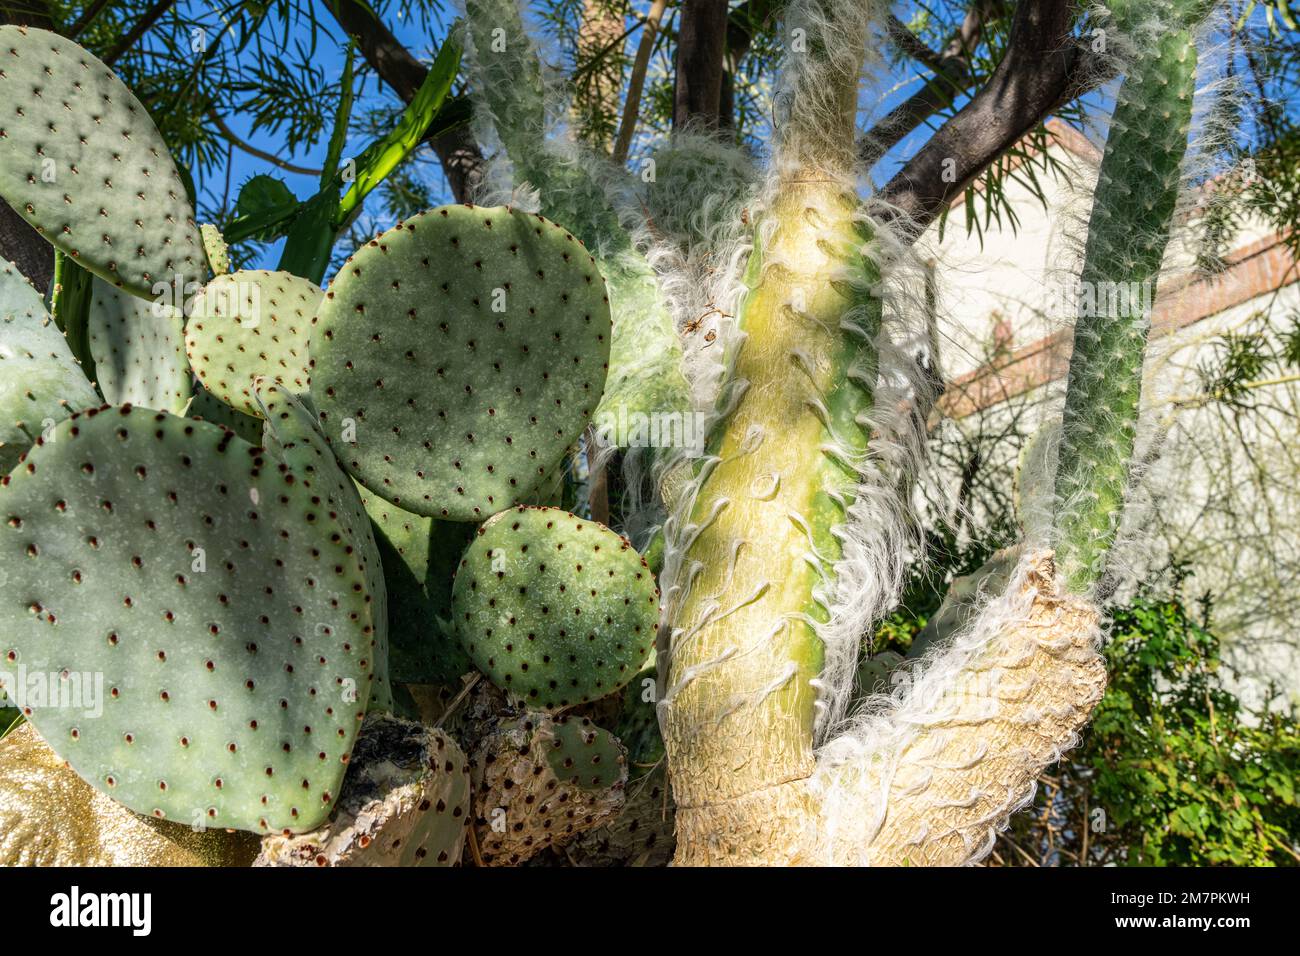 prickly pear cactus beside a snow prickly pear cactus (Opuntia erinacea ursine) which is covered with hair like fibers Stock Photo